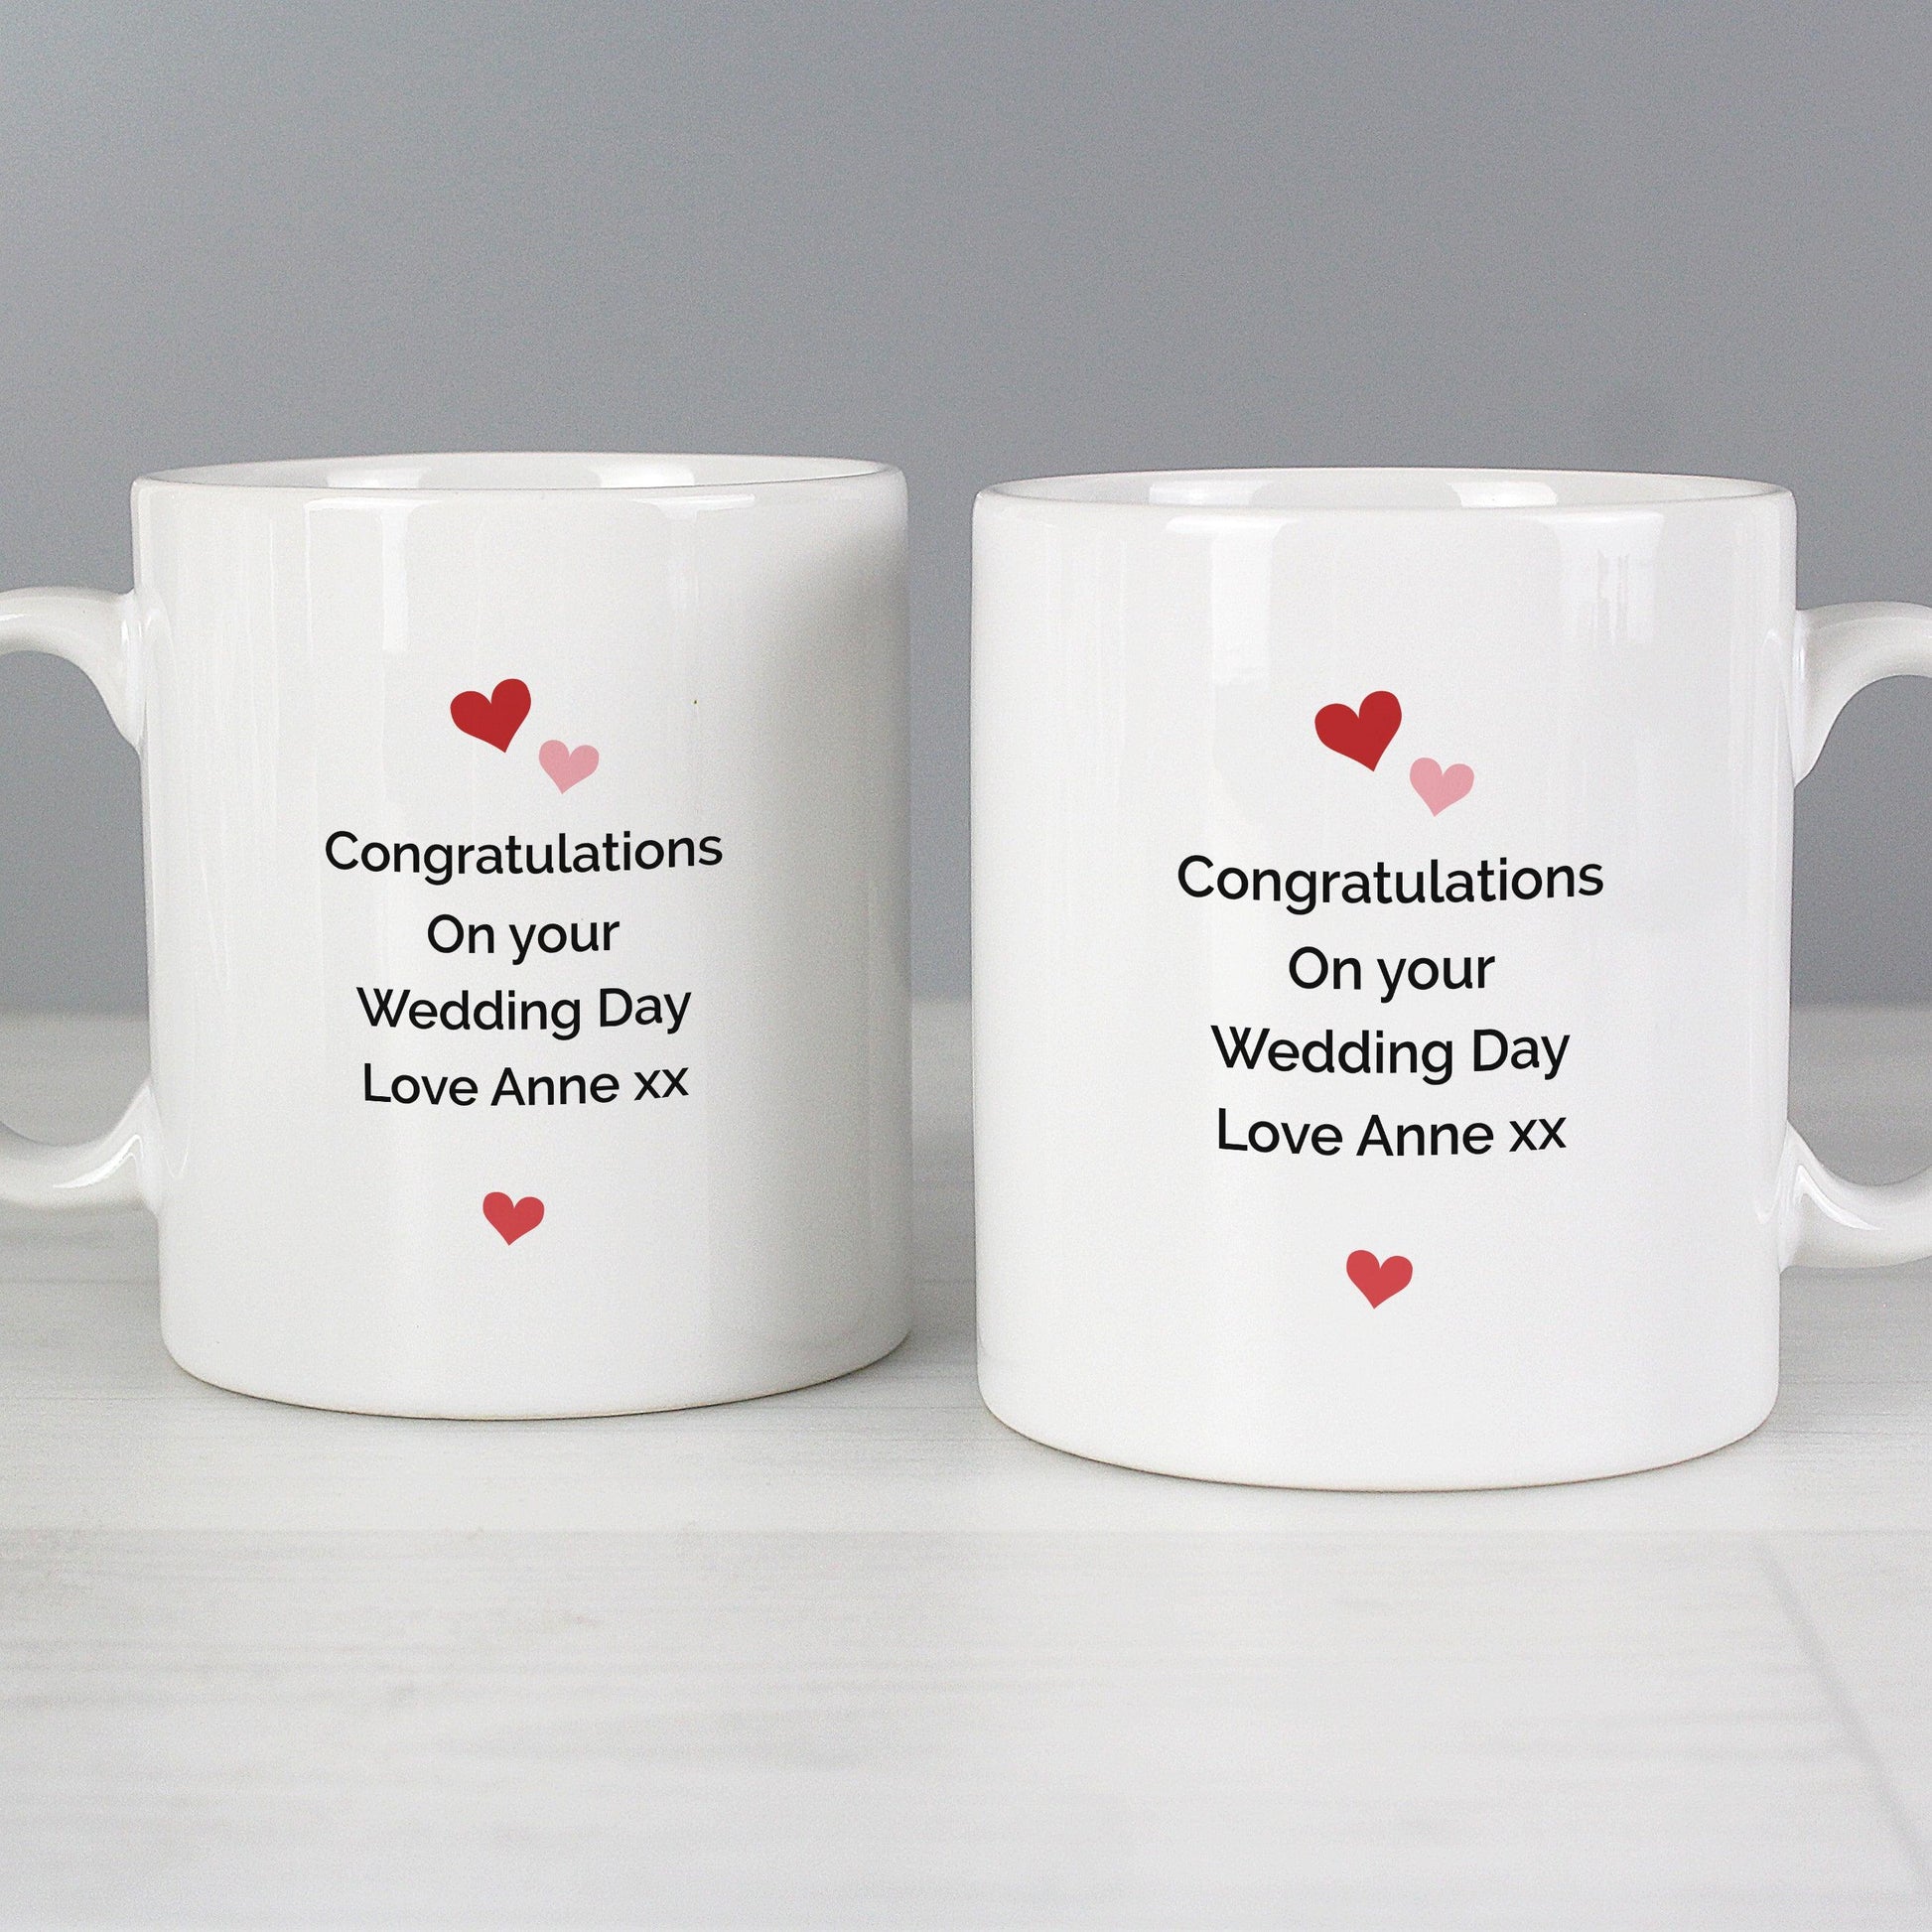 Personalised Mr & Mrs Valentine's Day Couple Confetti Hearts Mug Set - Home Inspired Gifts